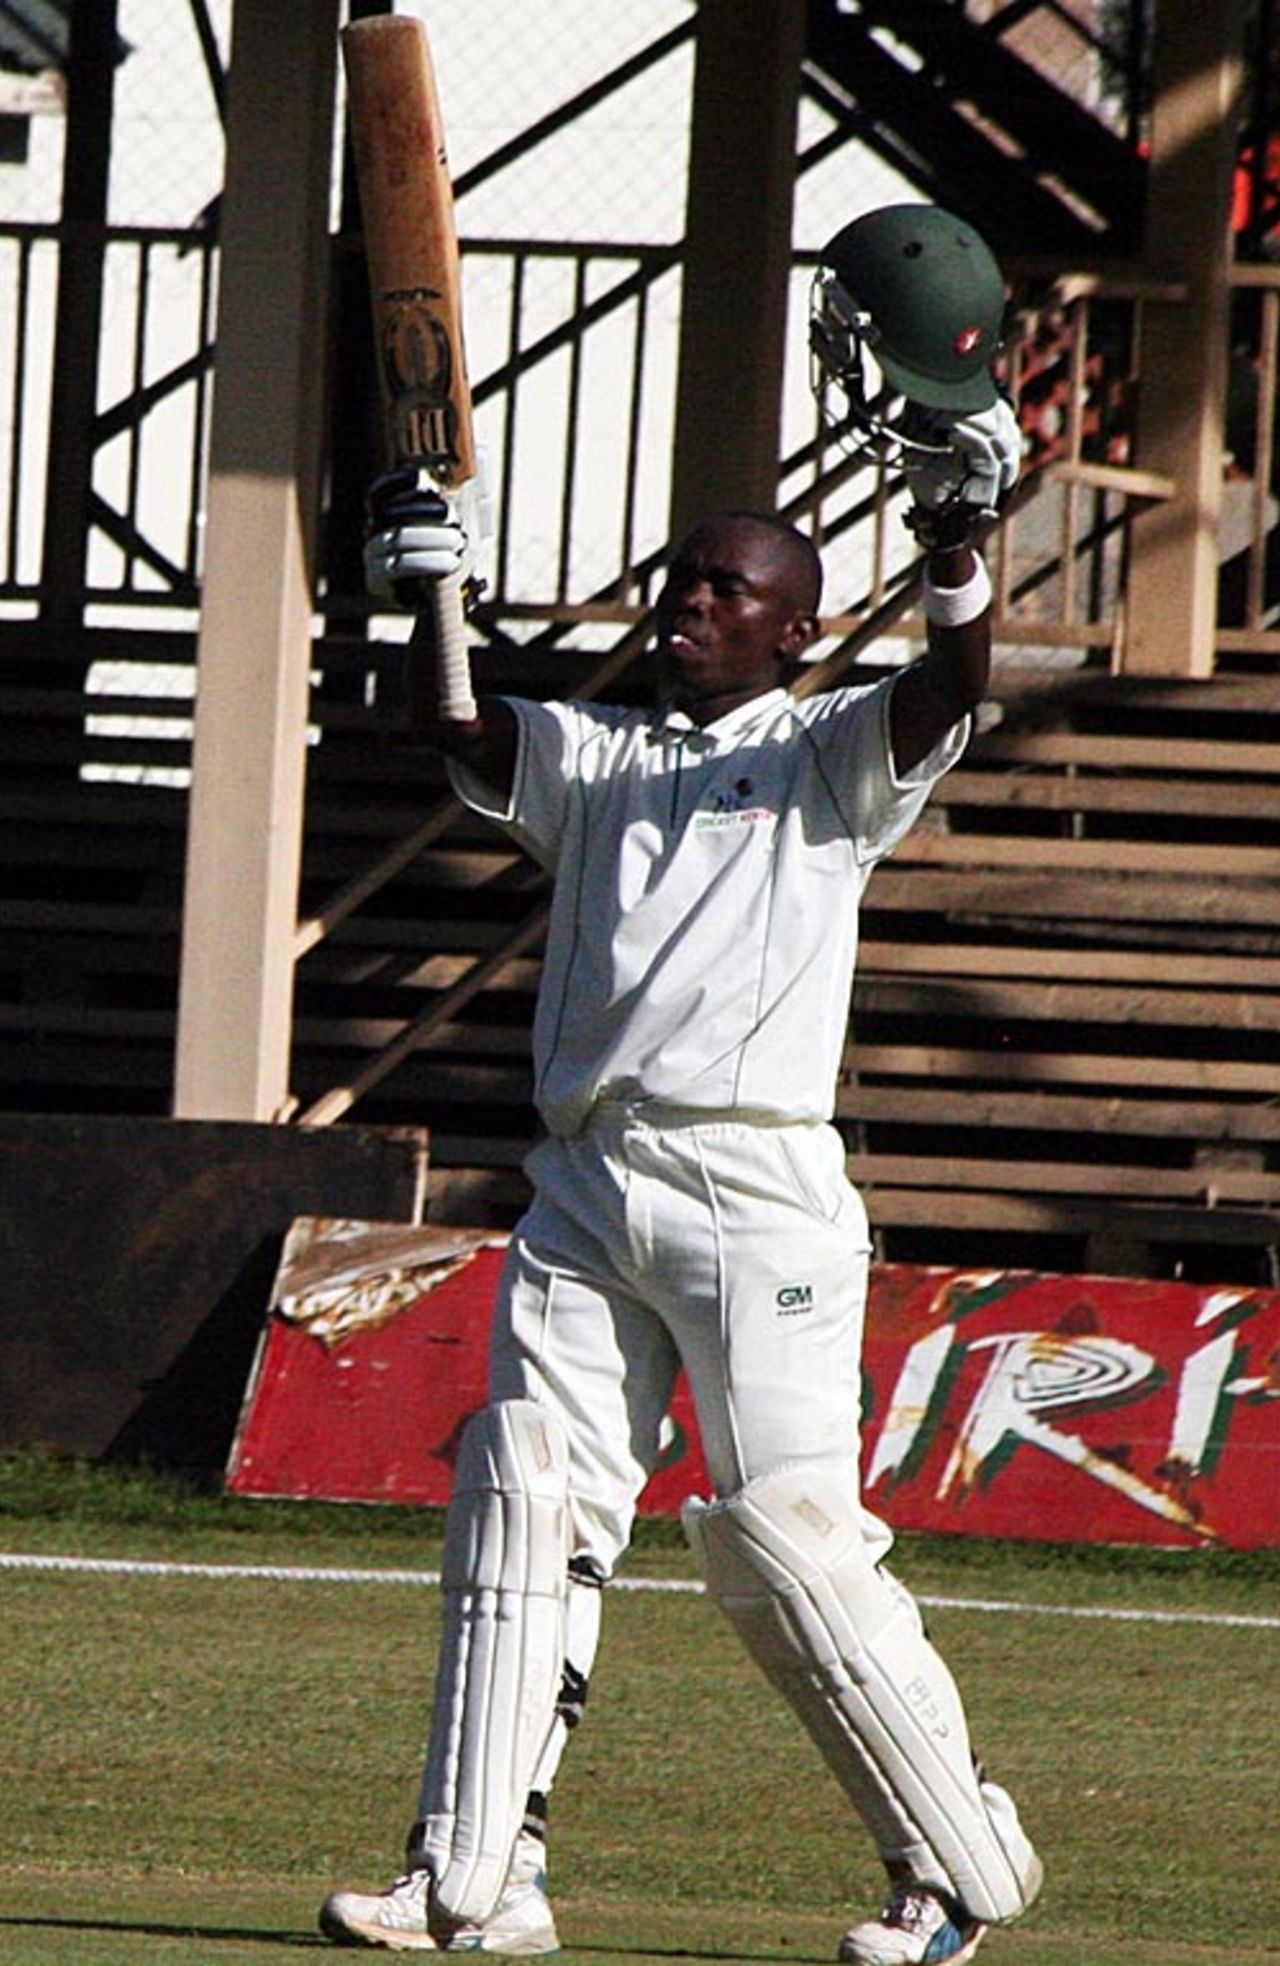 Maurice Ouma acknowledges the cheers after reaching his century, Kenya v Scotland, ICC Intercontinental Cup, Nairobi, 3rd day, January 27, 2010